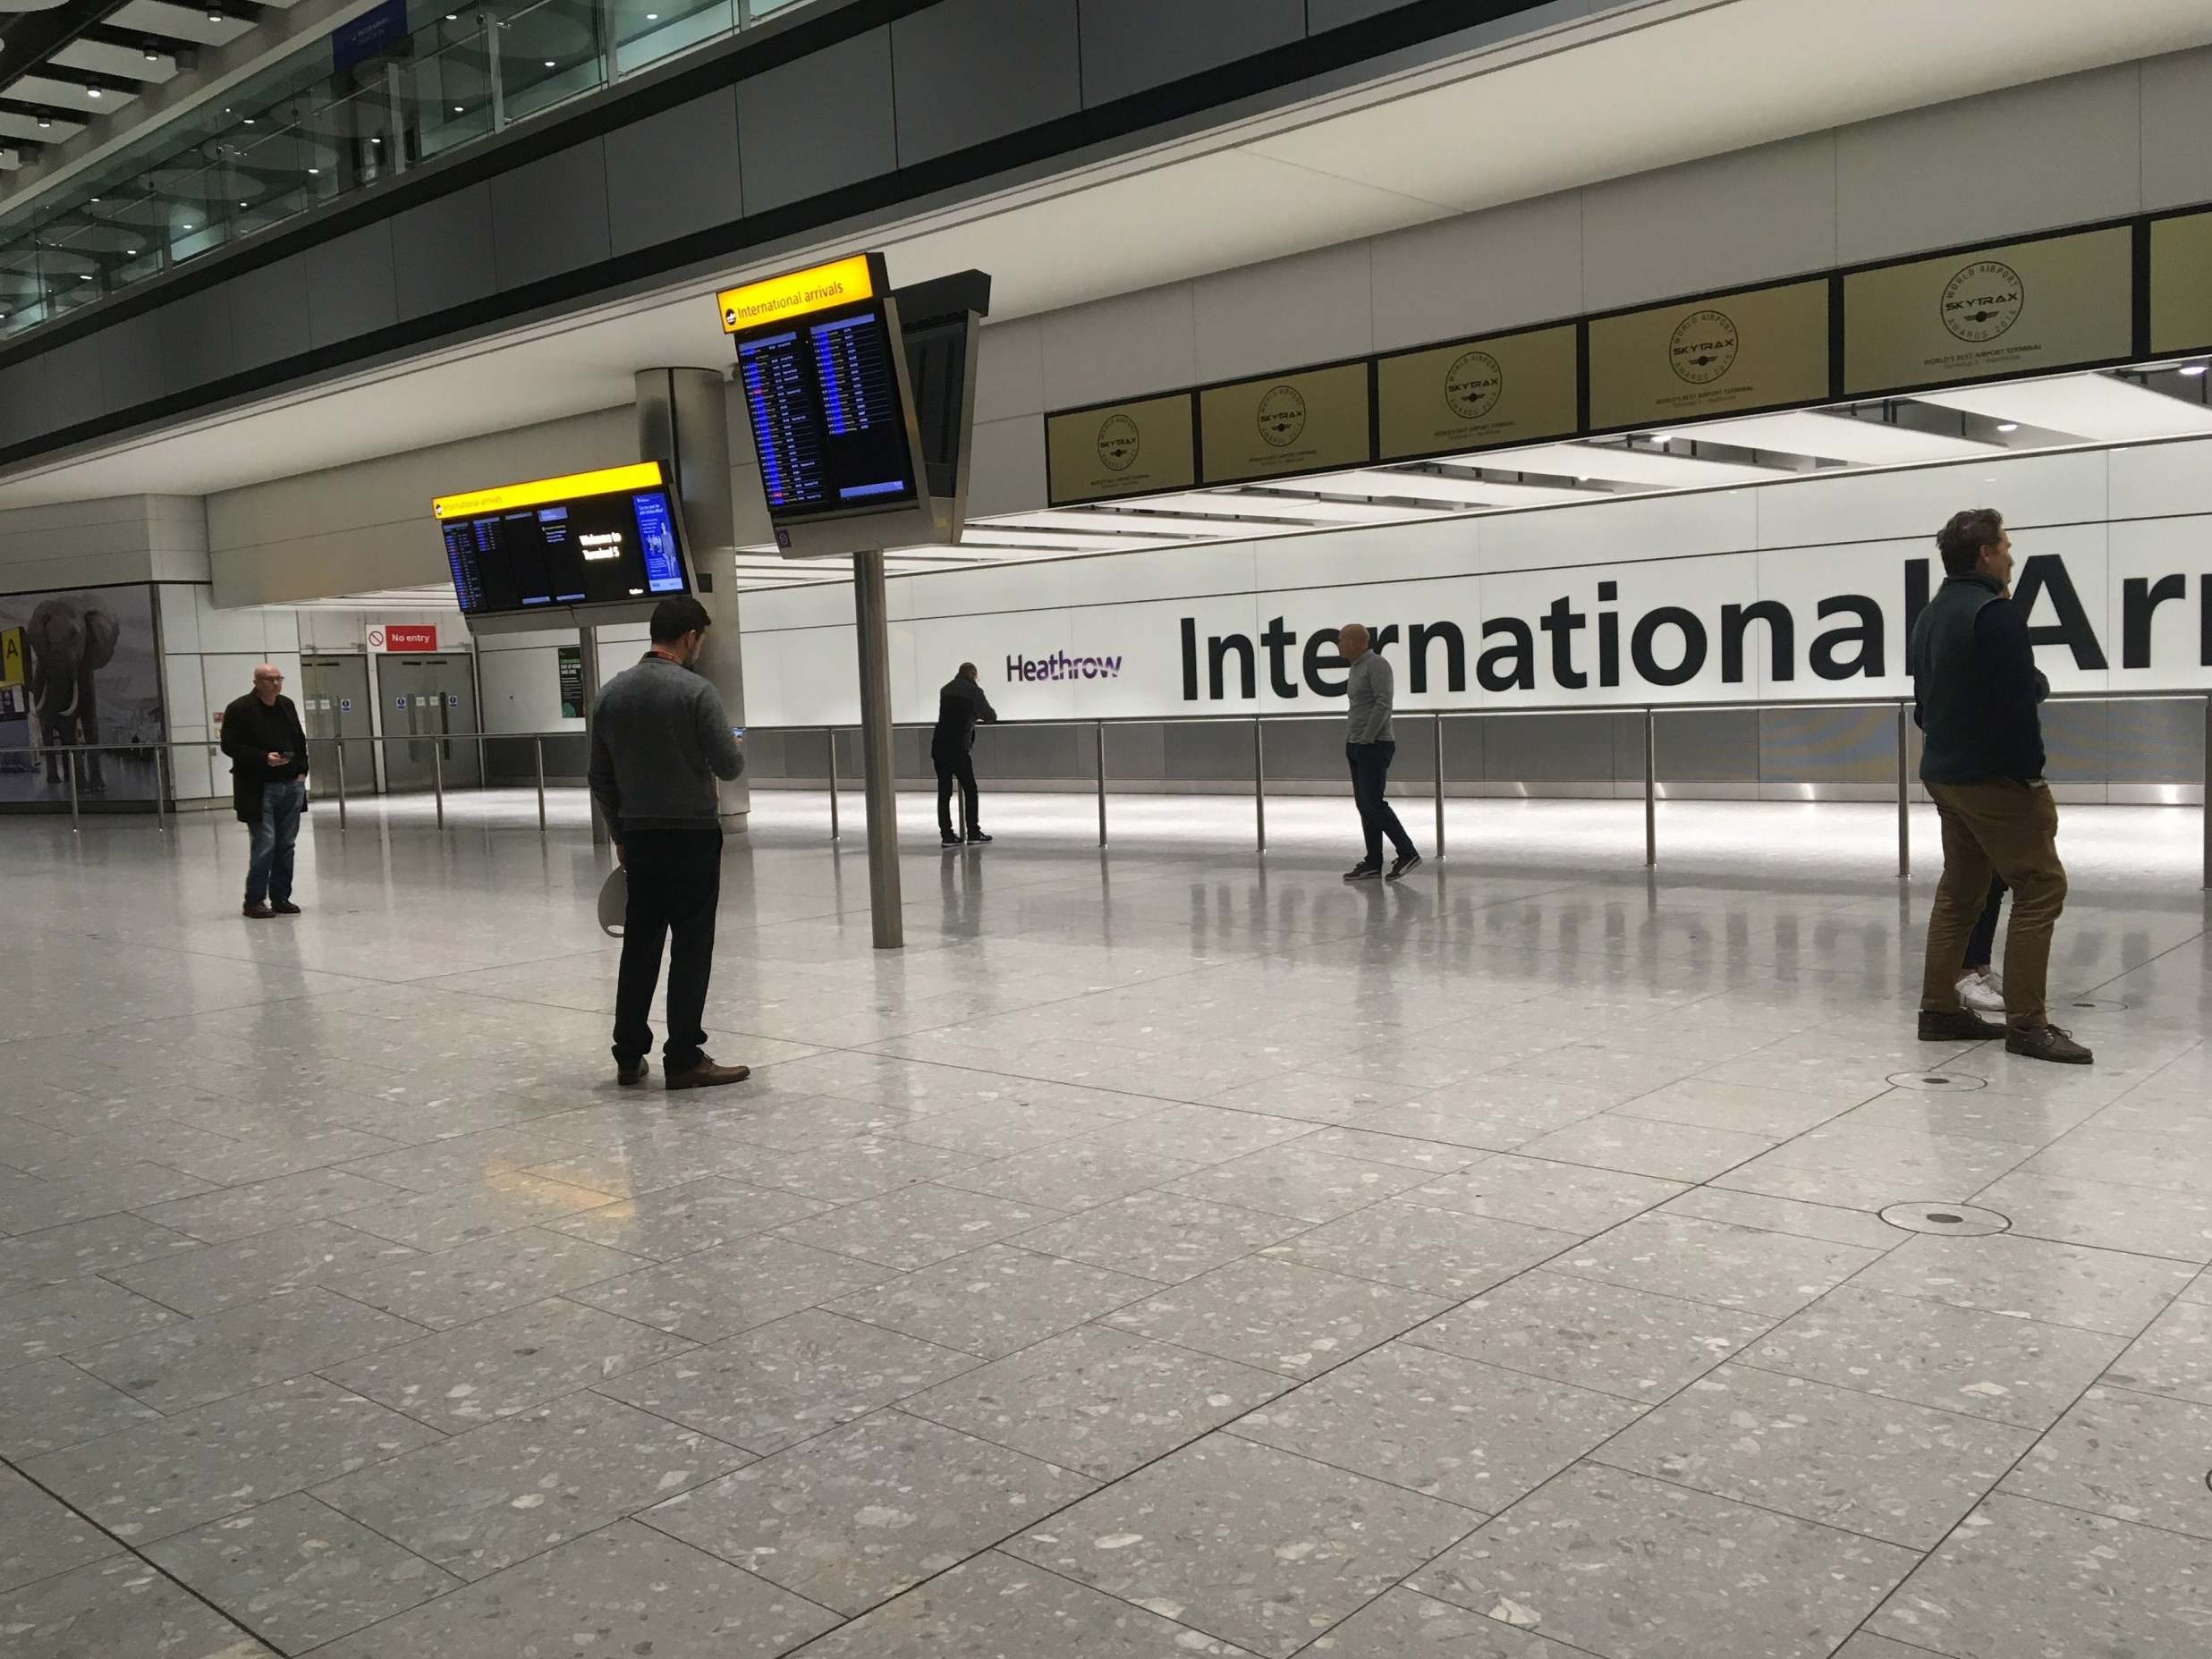 Heathrow airport is empty after the coronavirus brought the travel industry to a grinding halt